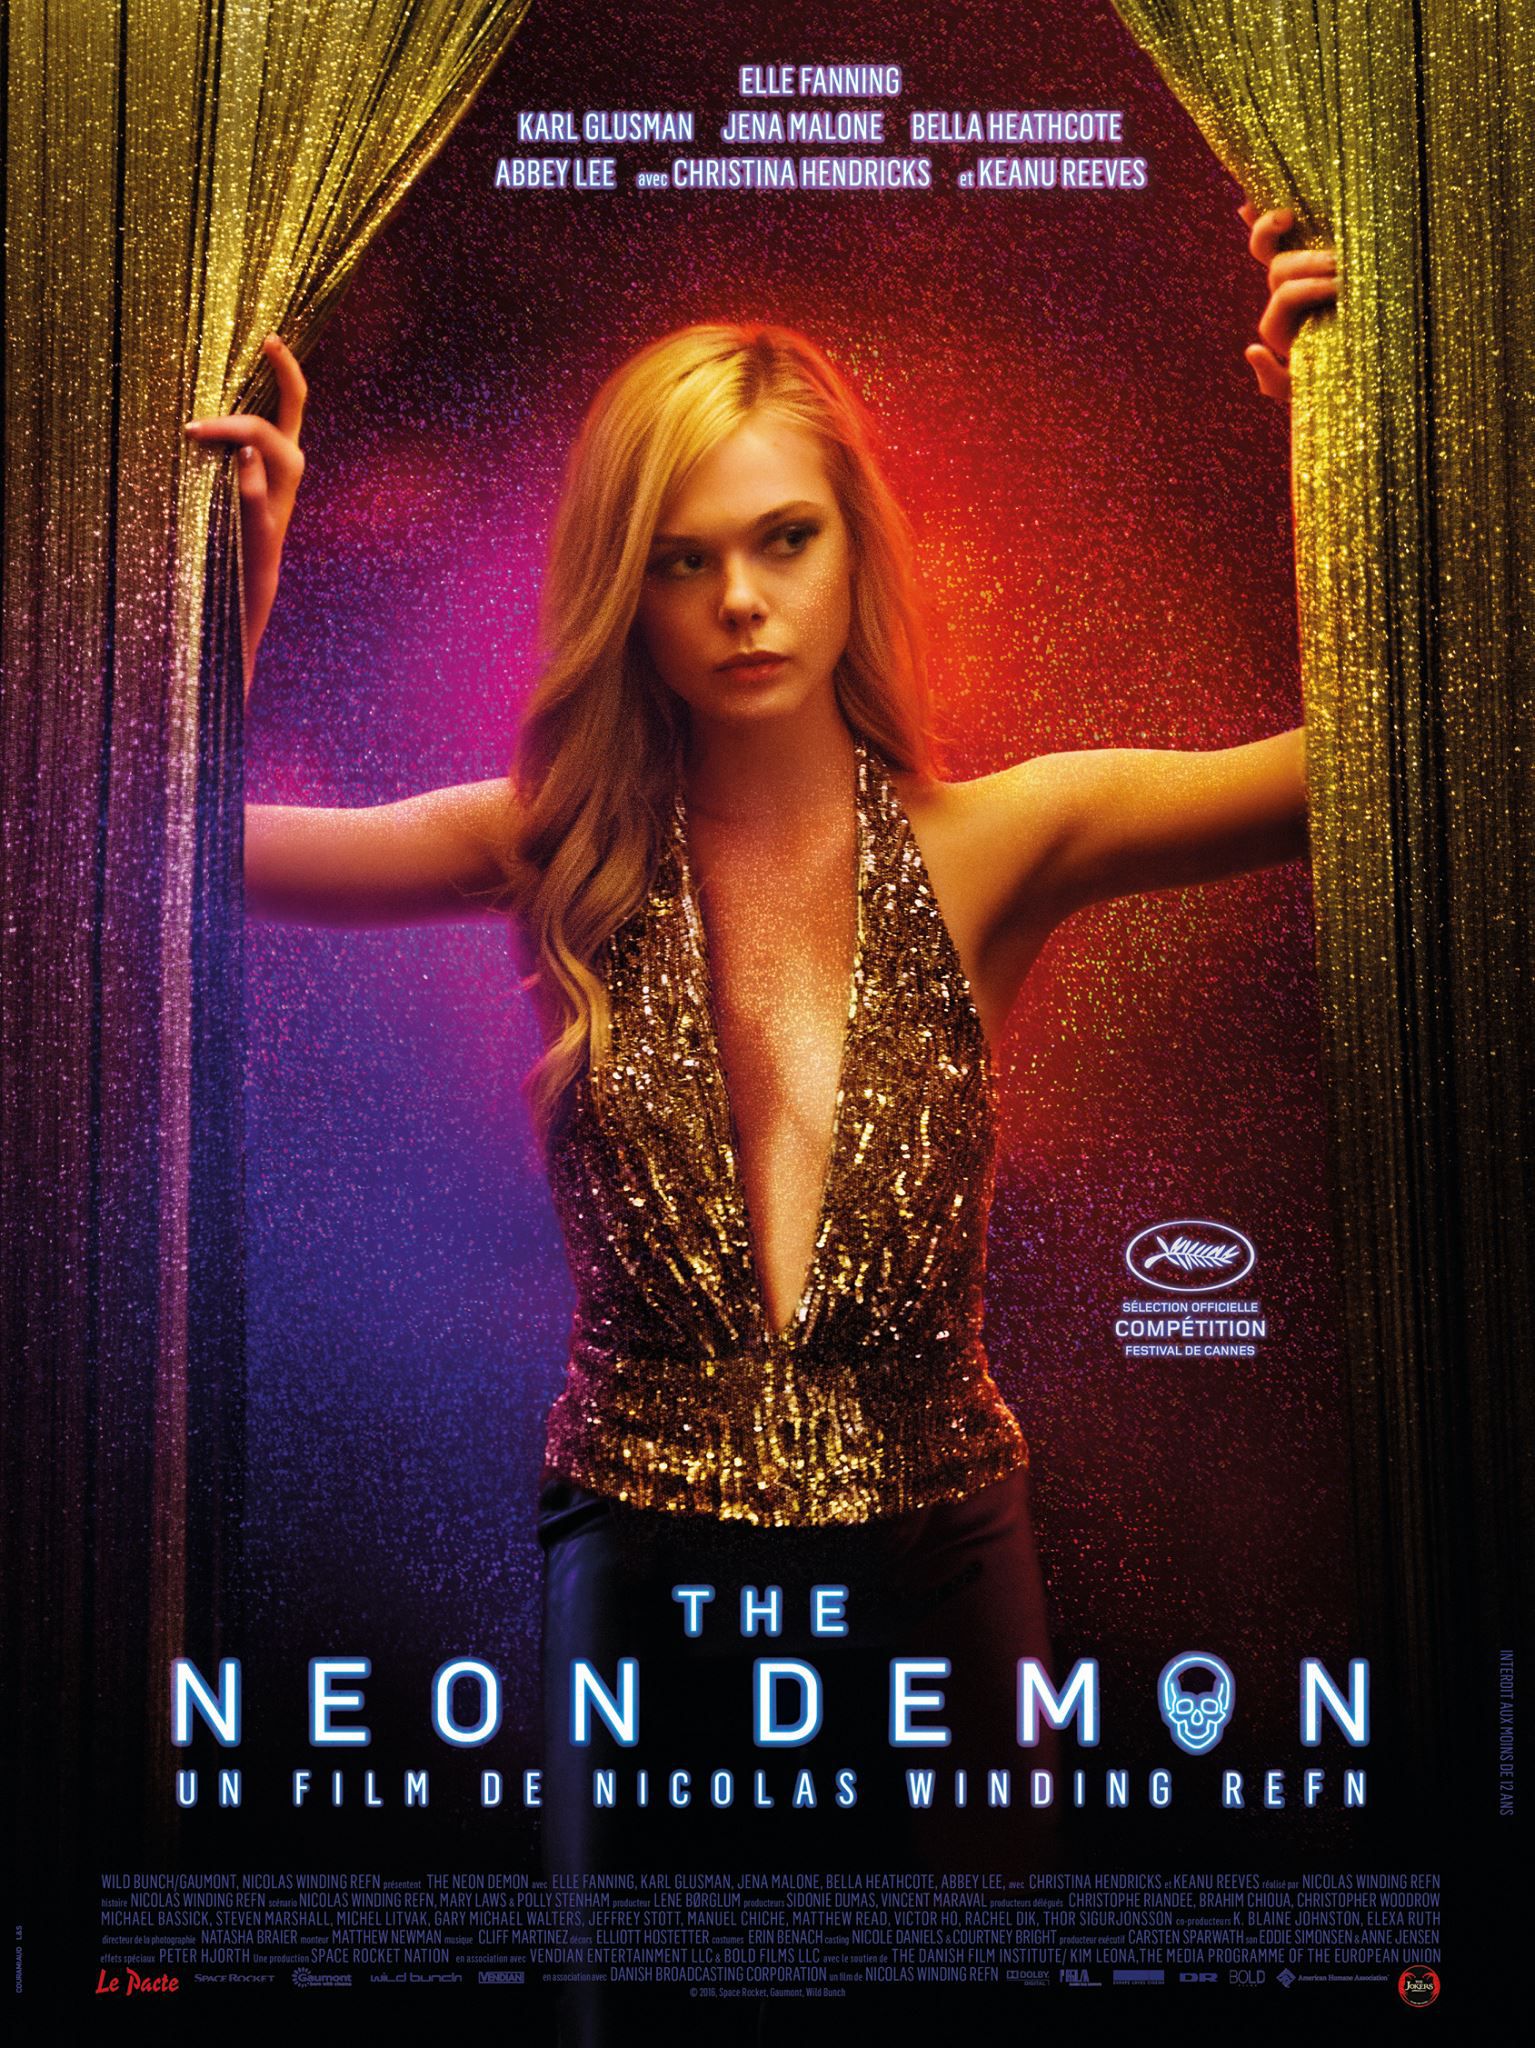 The Neon Demon - Film (2016) streaming VF gratuit complet